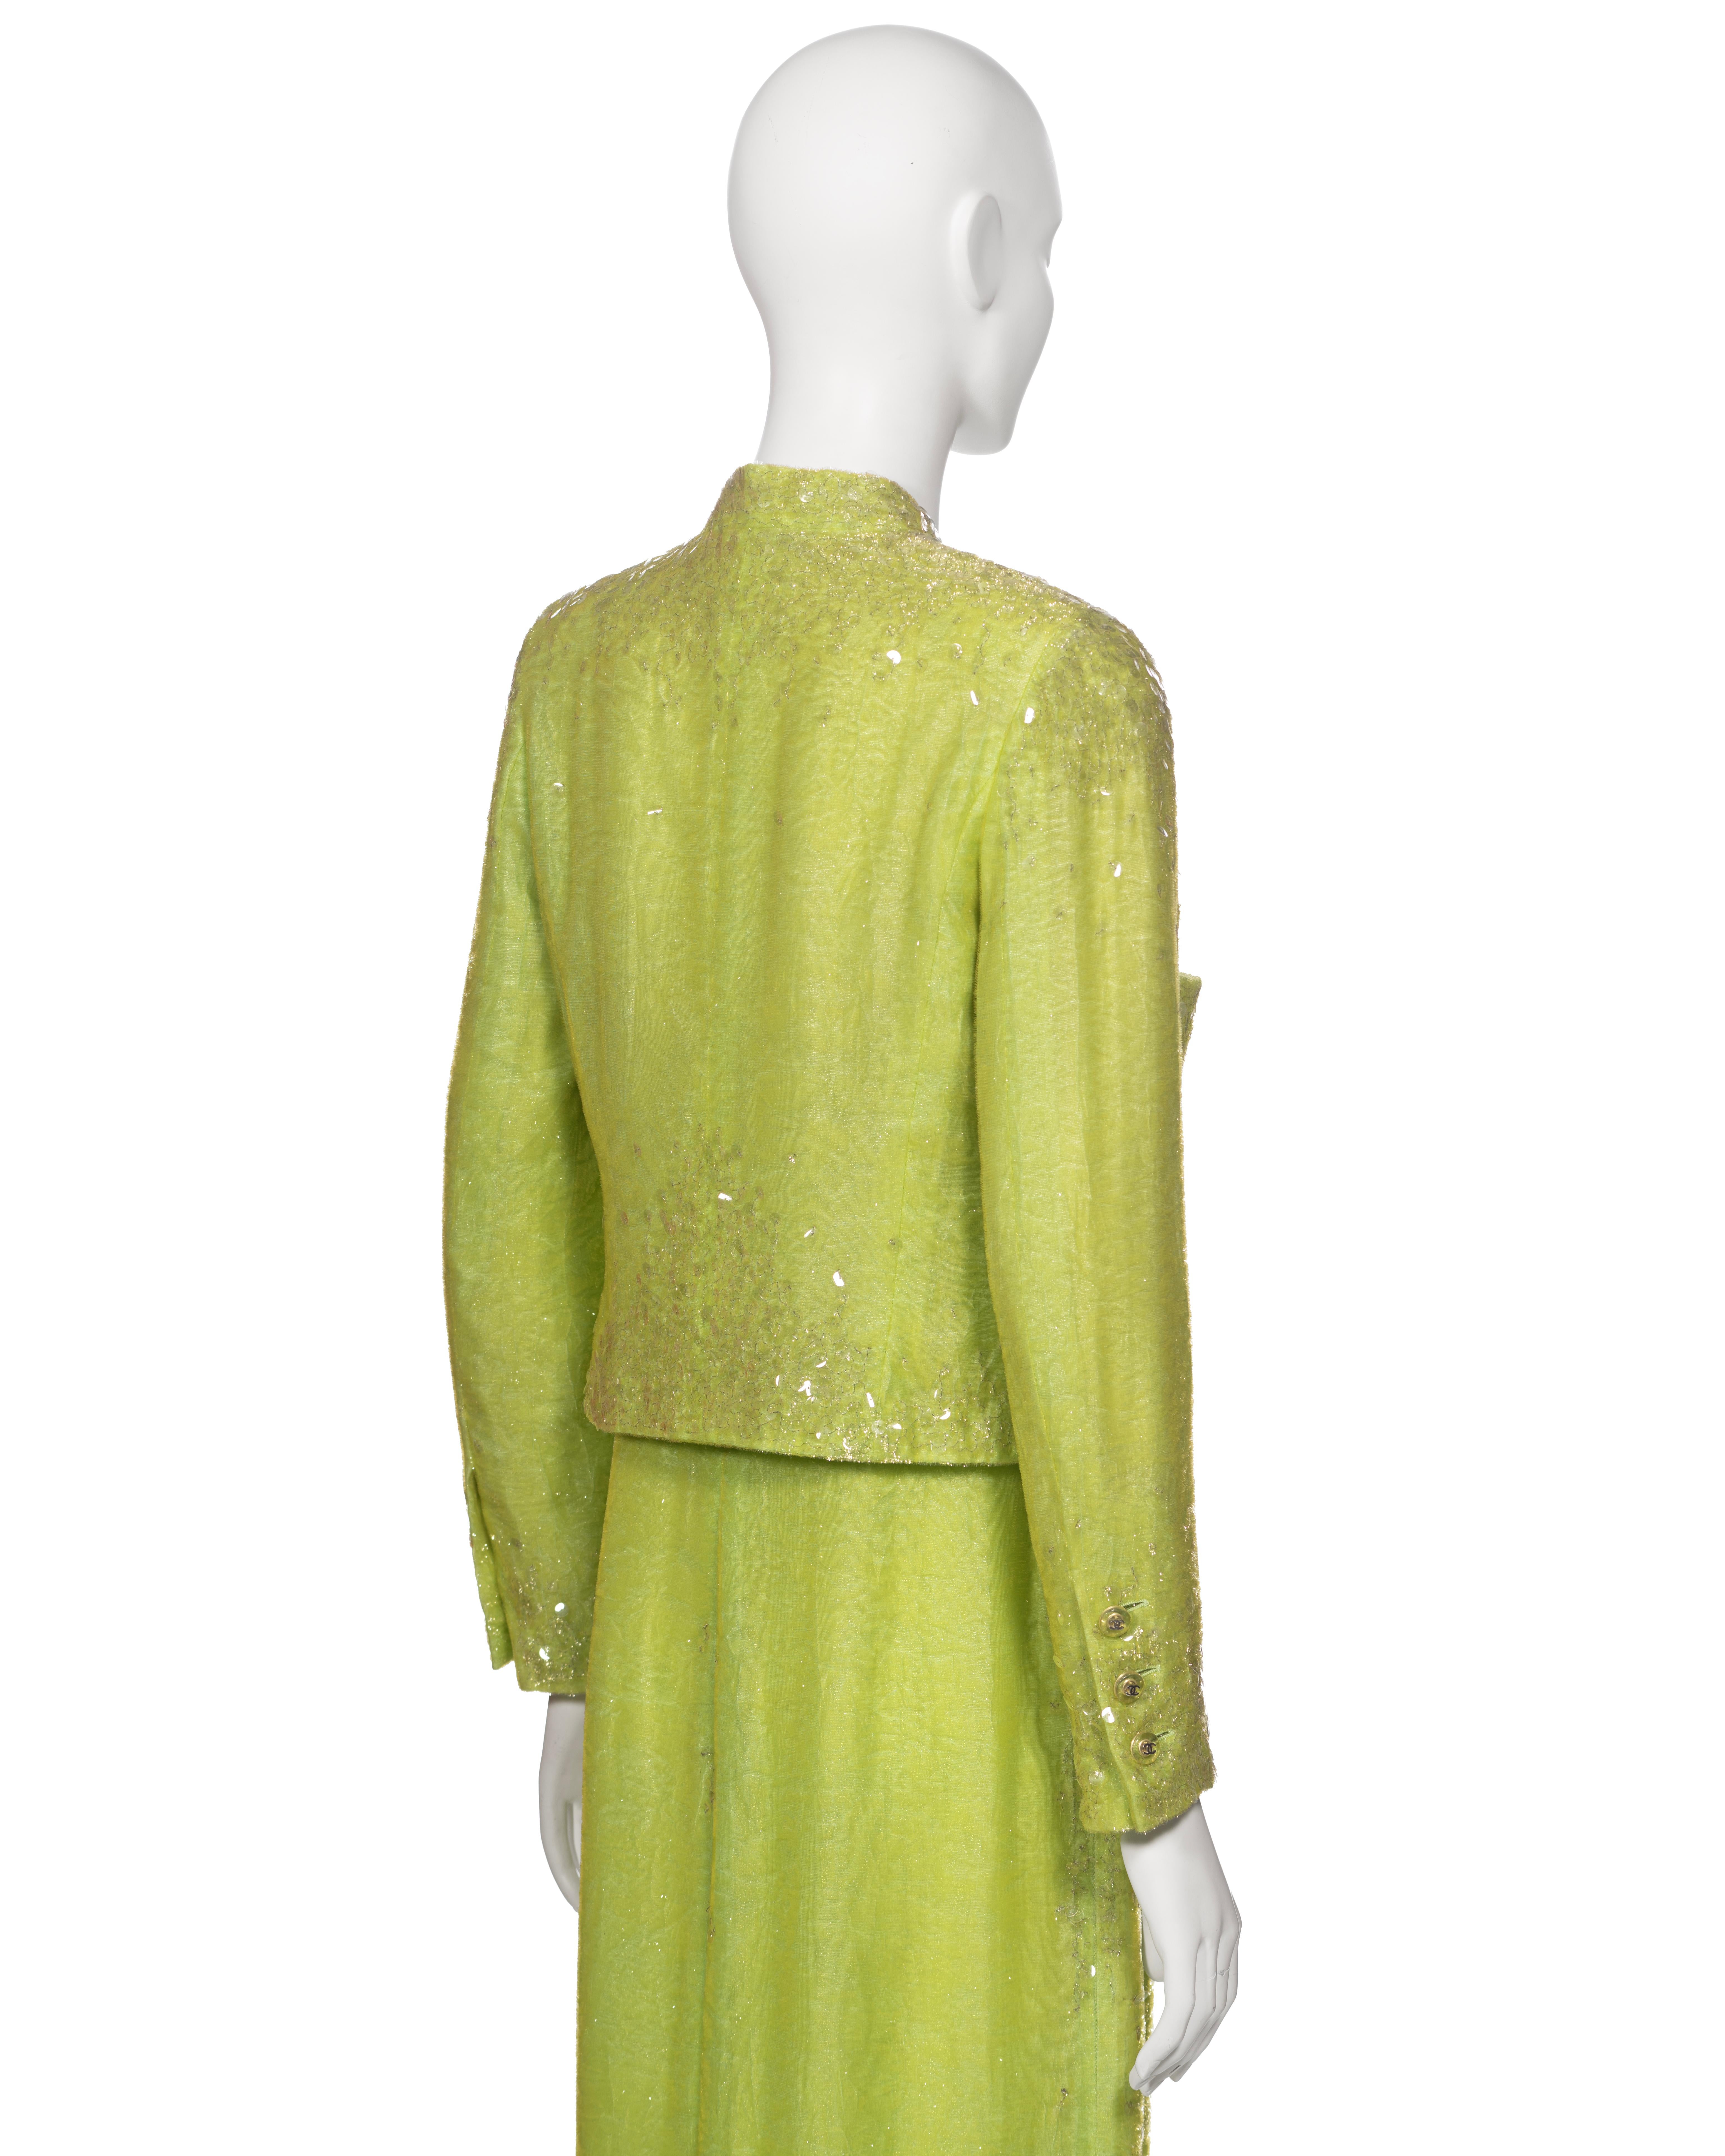 Chanel by Karl Lagerfeld Embellished Lime Green Velvet Dress and Jacket, ss 1997 For Sale 10